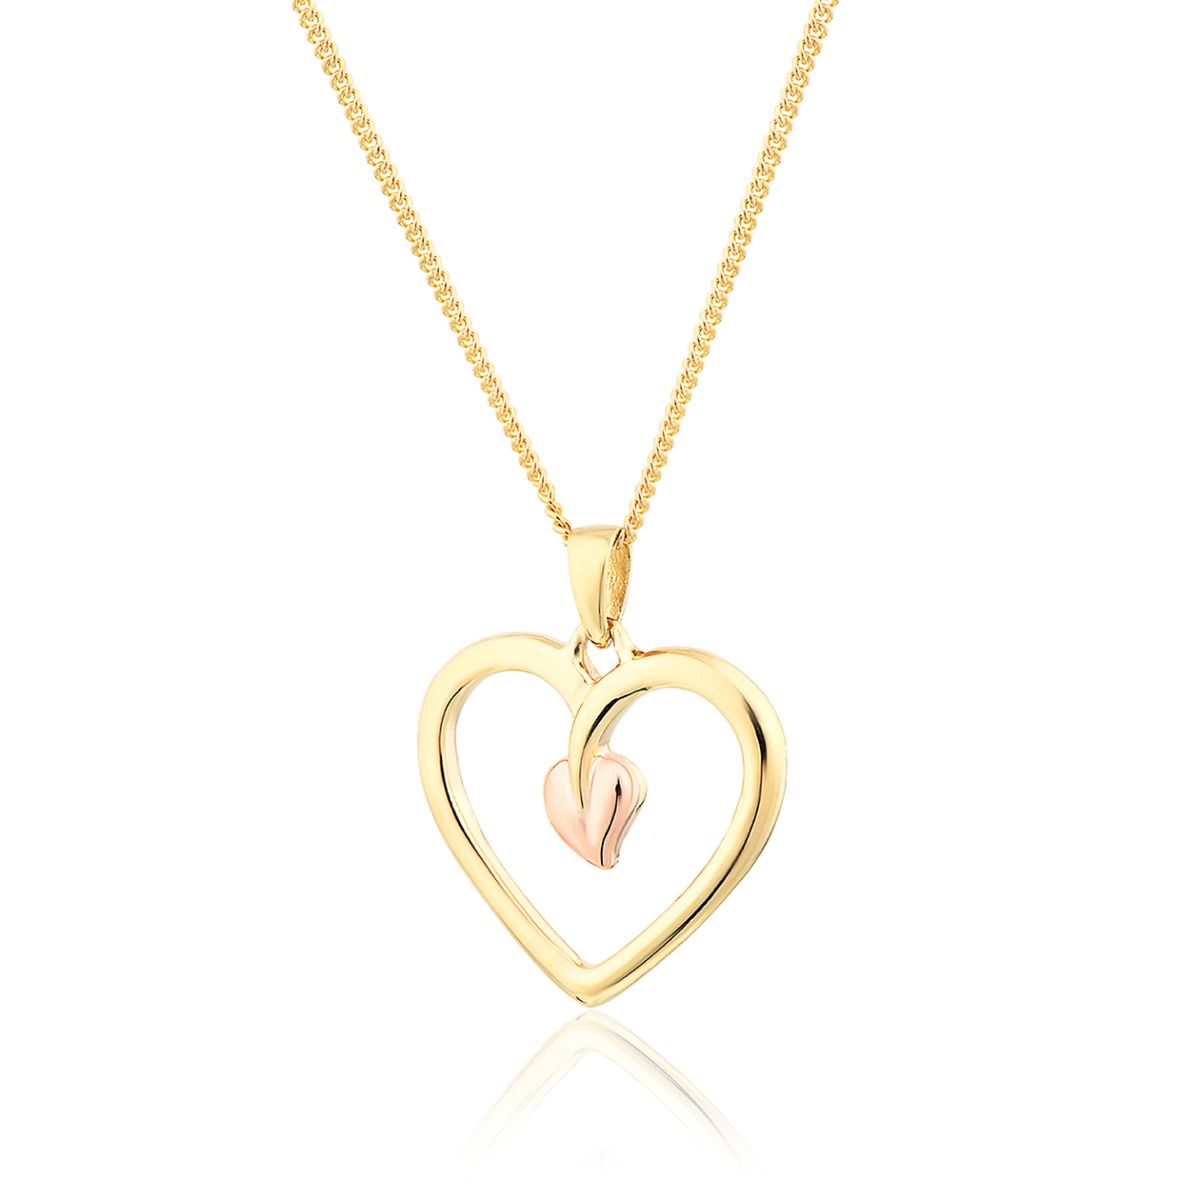 CLOGAU WELSH GOLD Forget Me Not Pendant and 9ct Gold Chain, Topaz &  Diamond. £550.00 - PicClick UK